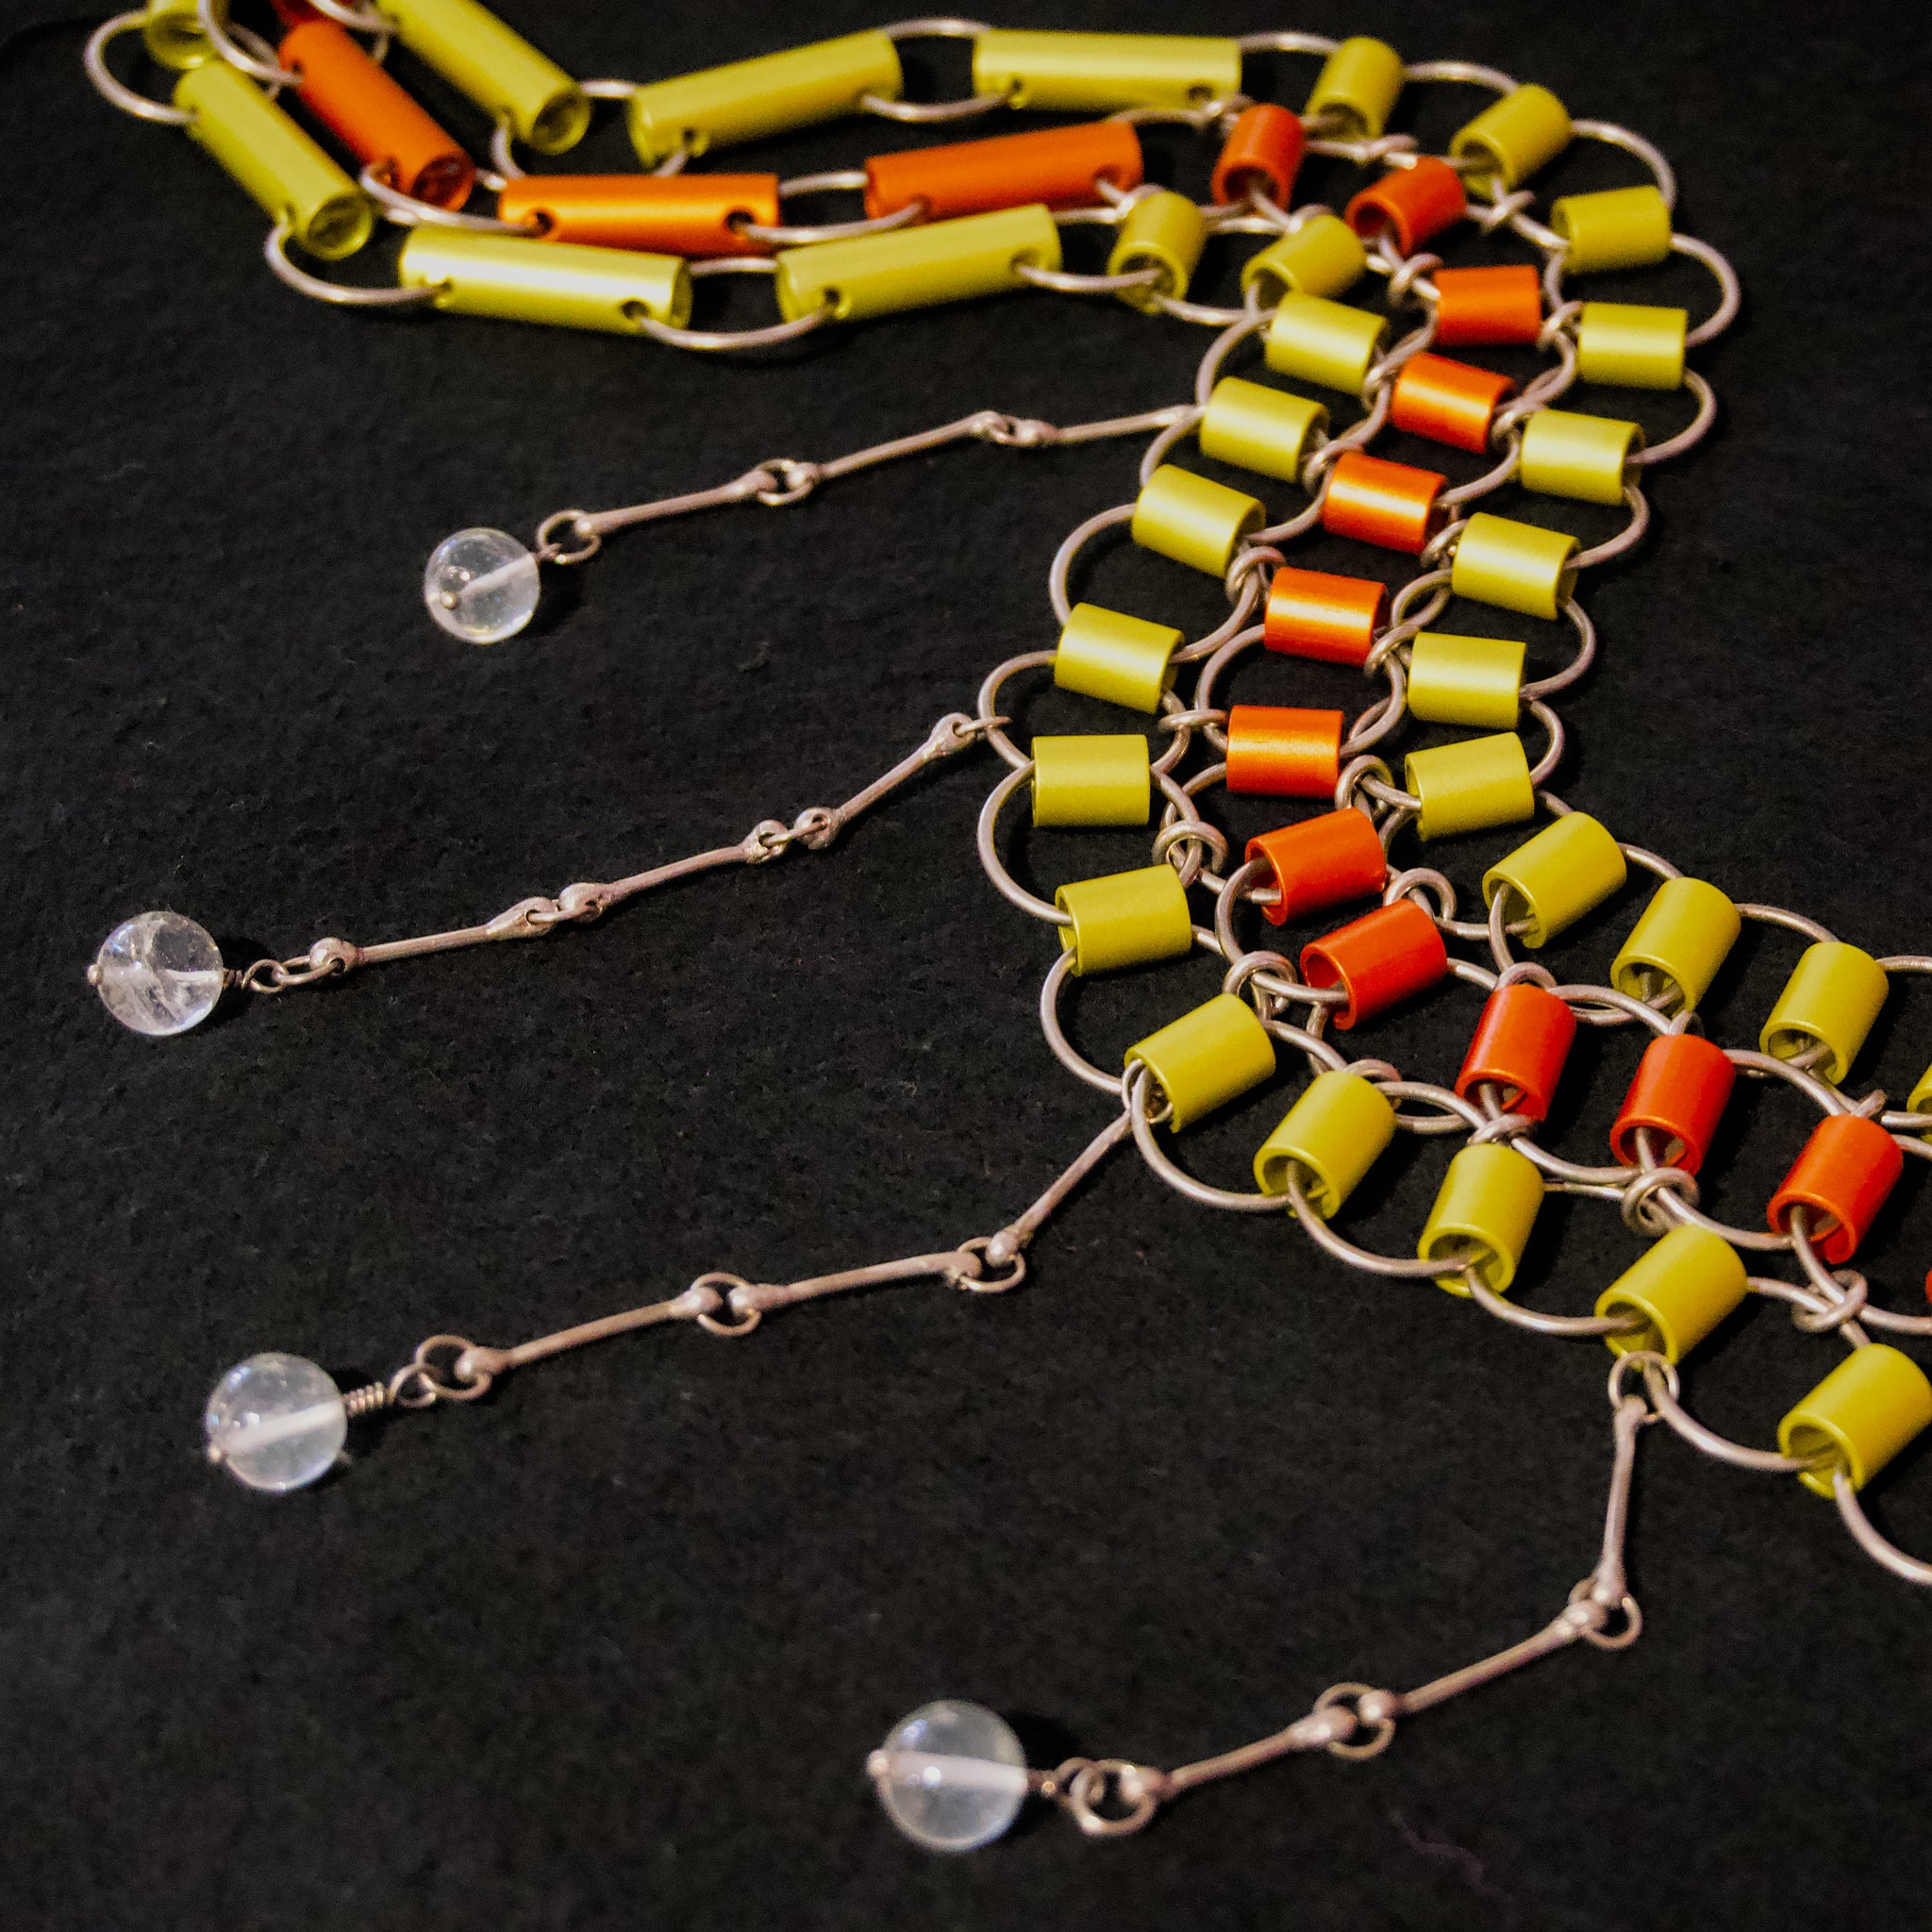 A decorative belt in sterling silver and colored anodised aluminum with rock crystal balls hanging down